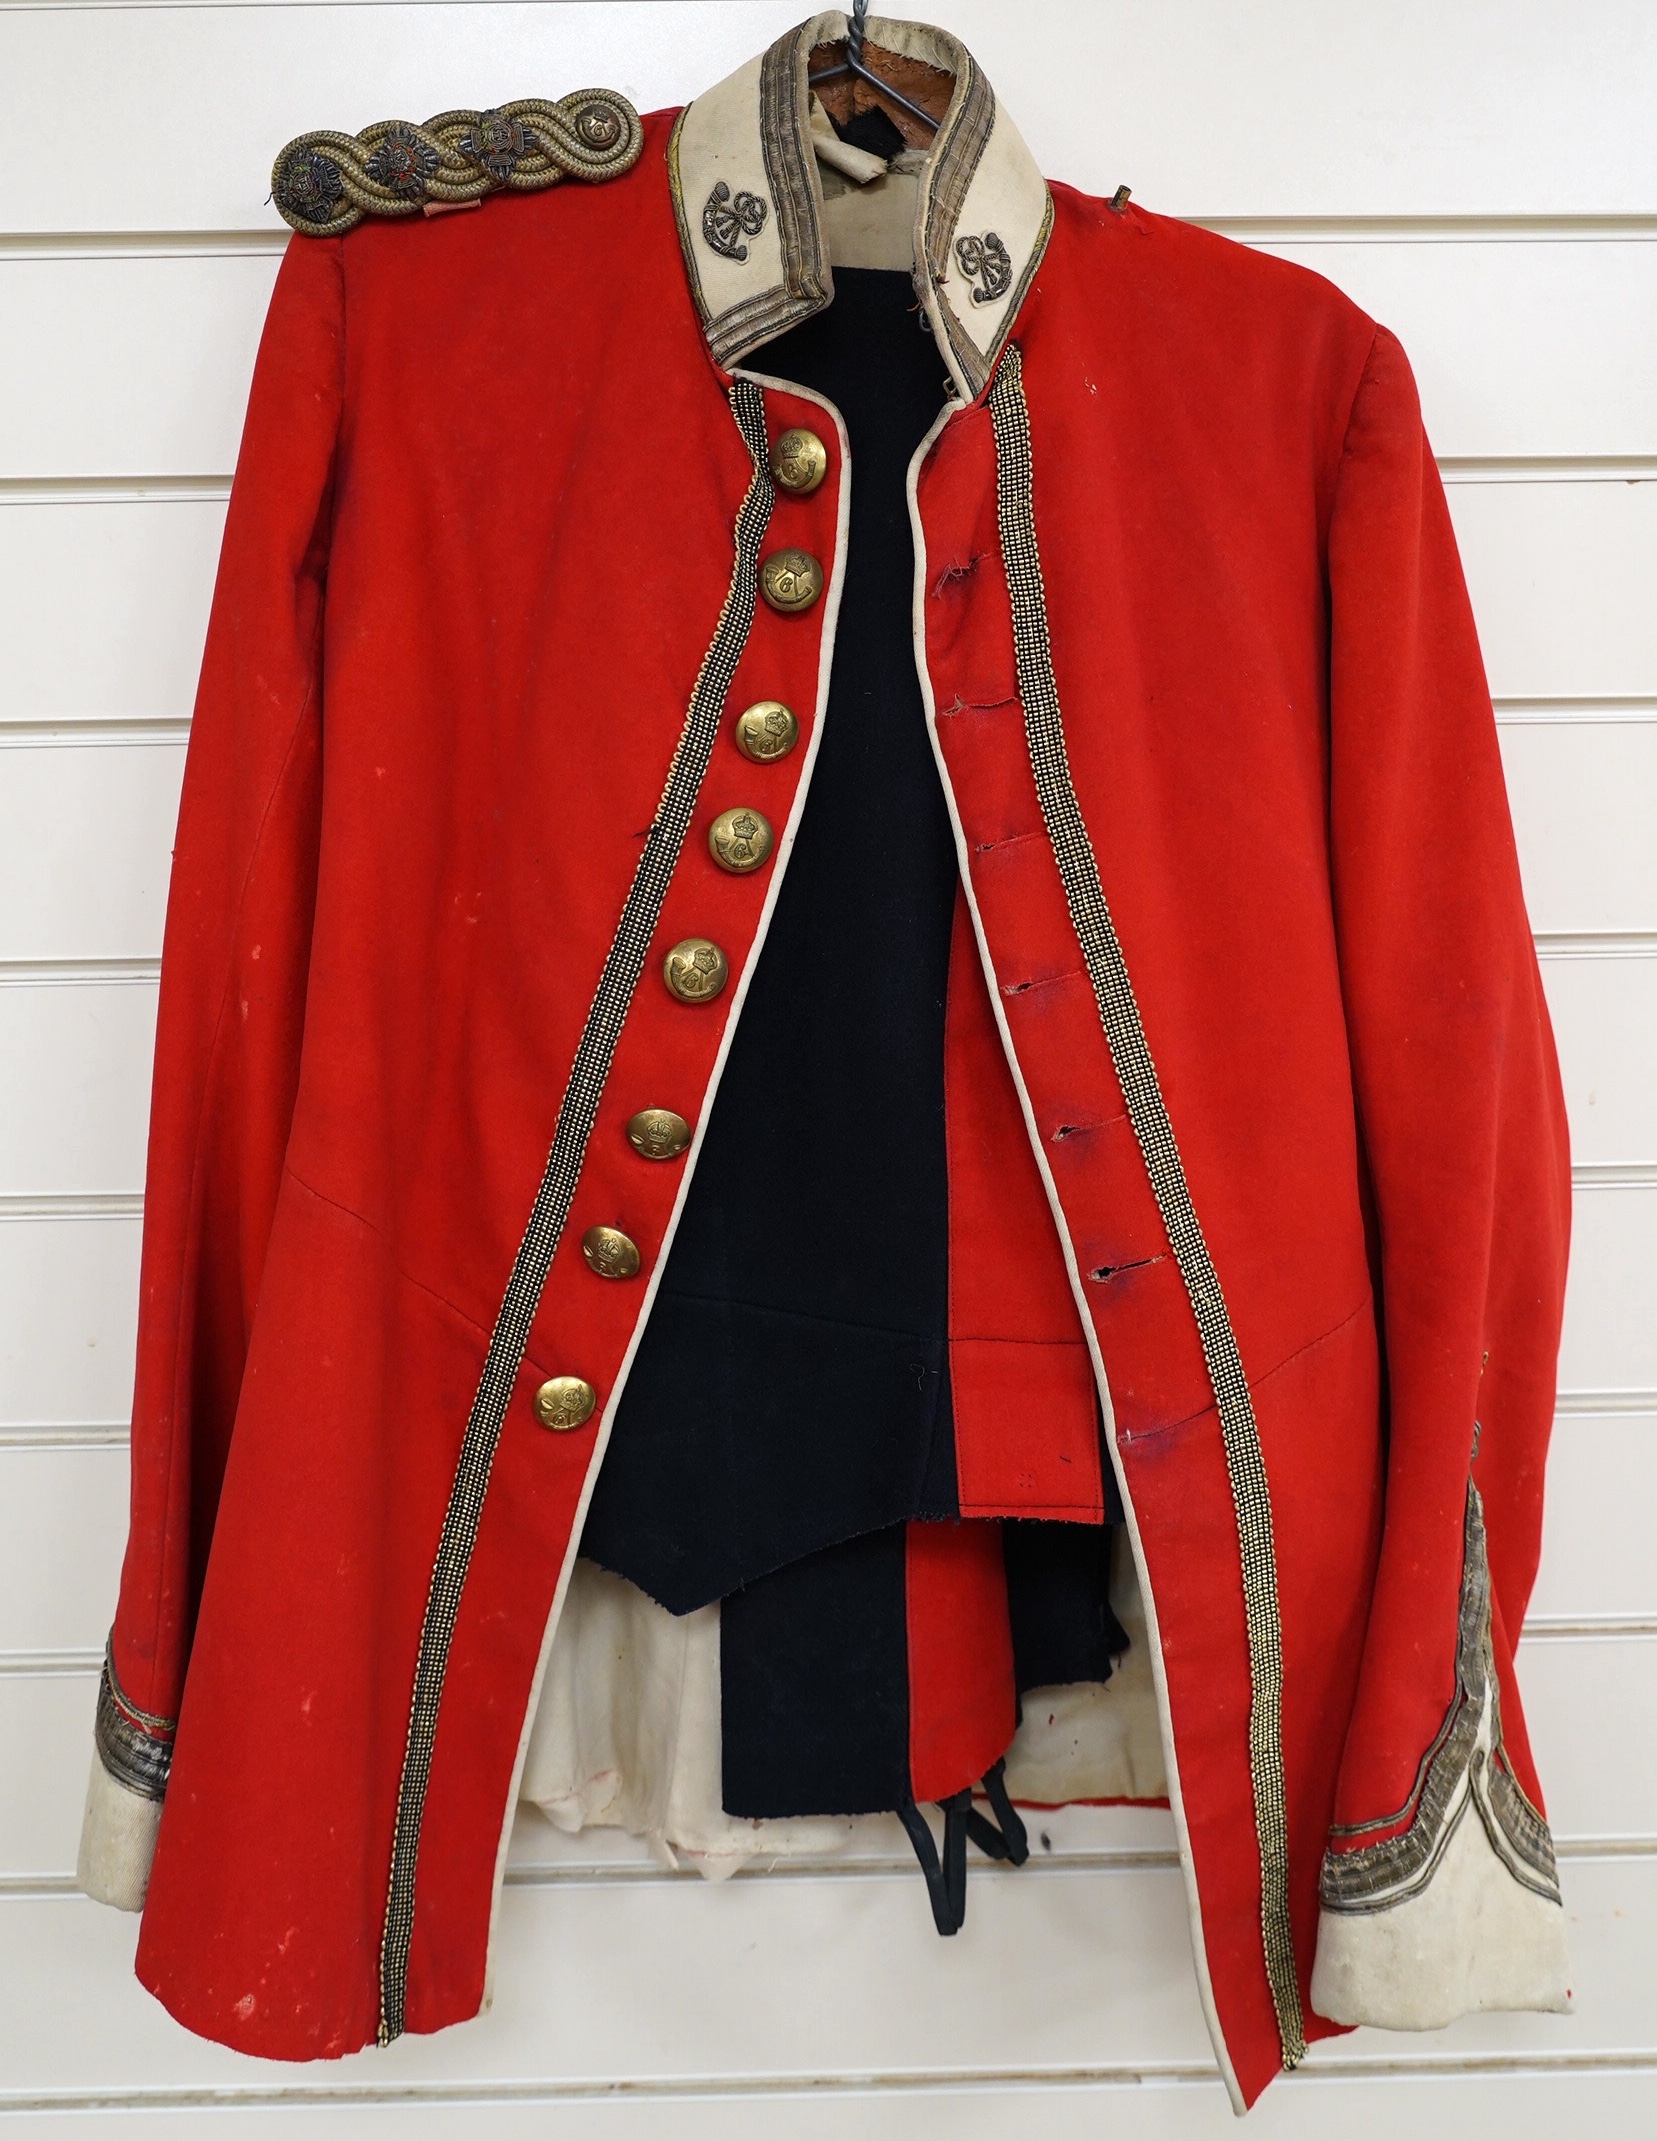 A Sixth Light Infantry officer’s uniform with epaulettes, comprising jacket and dress trousers. Condition - poor to fair, some staining and moth damage, etc.